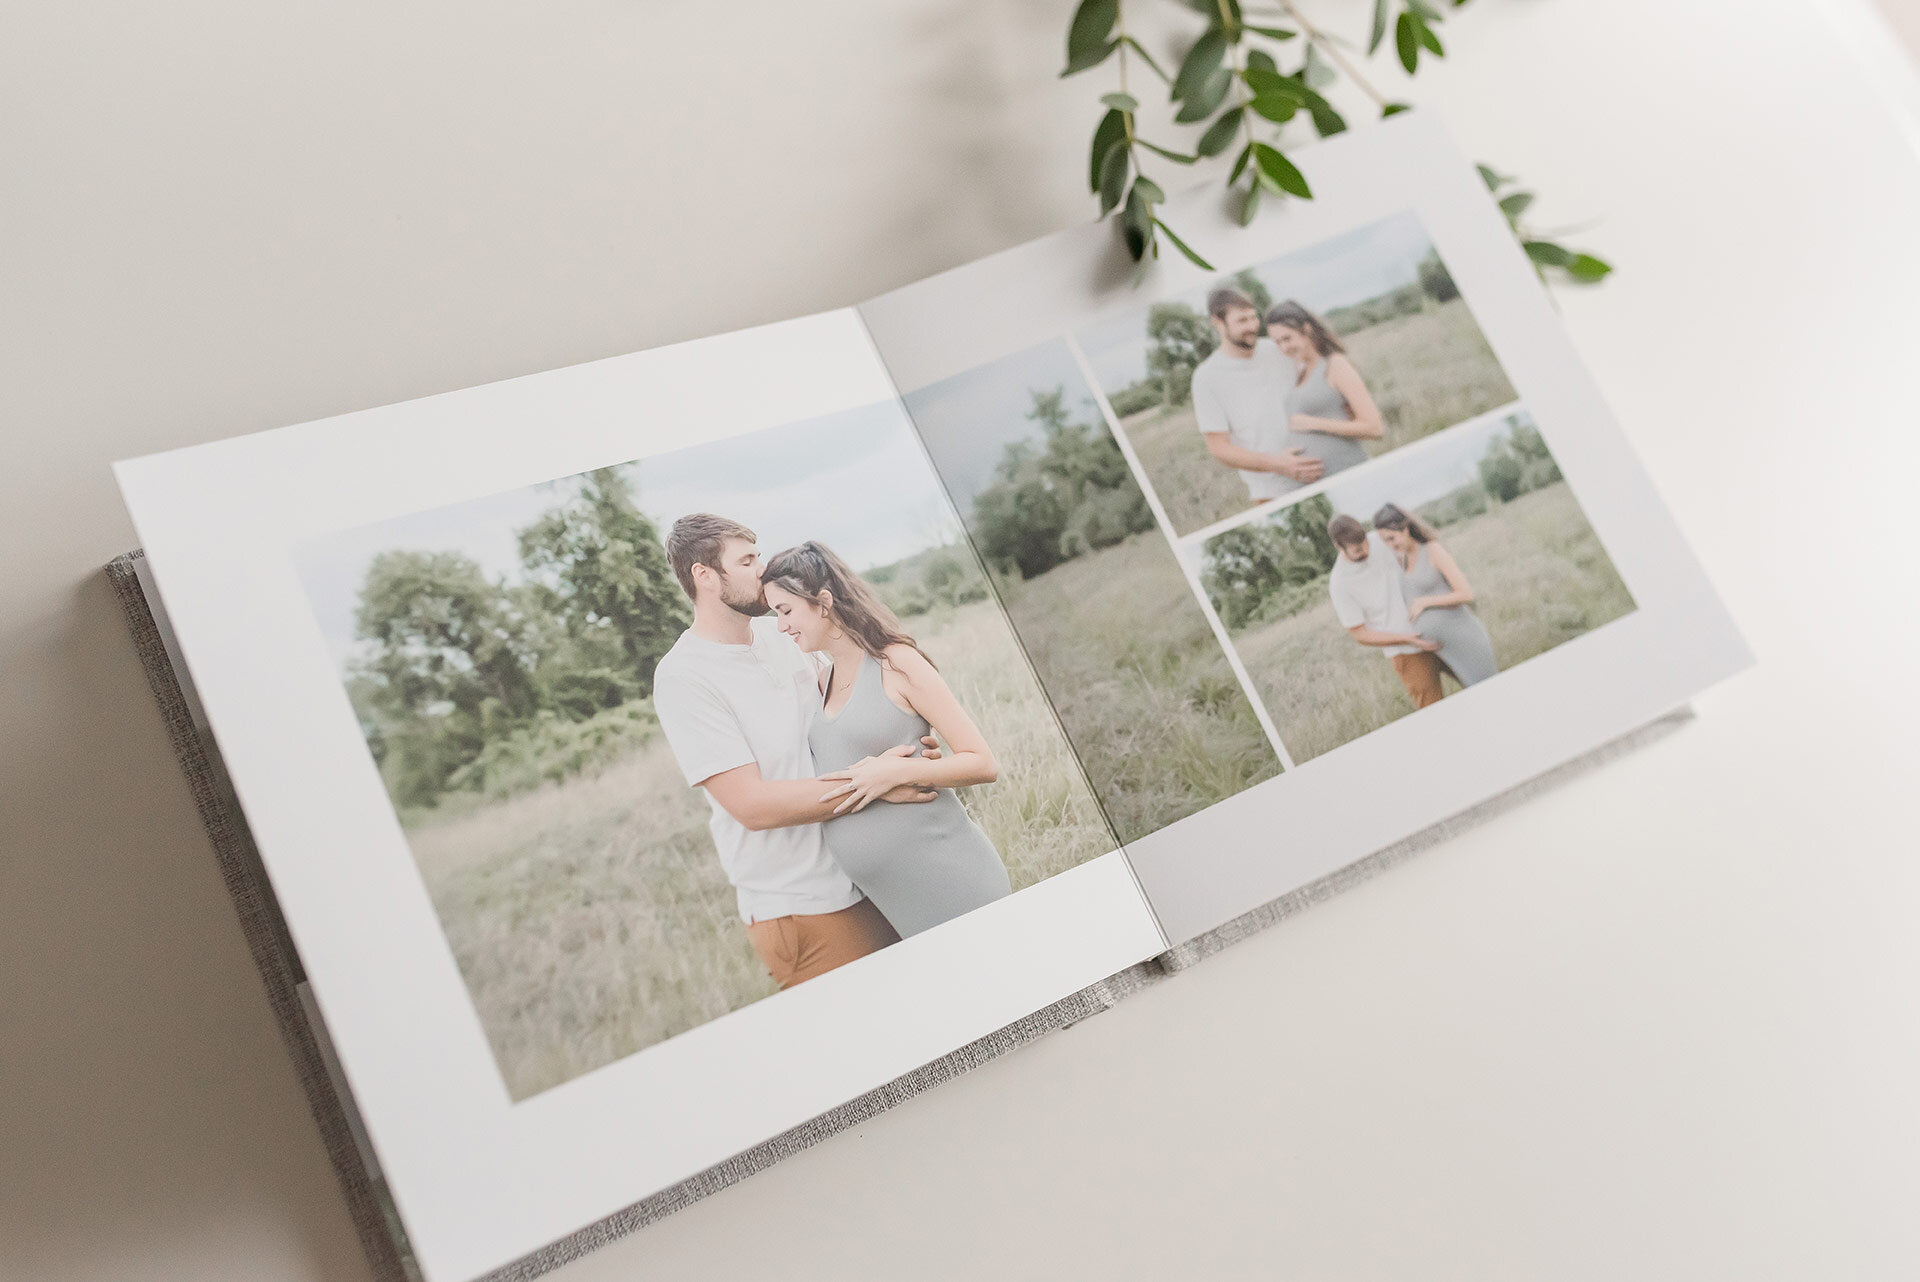 maternity photo albums made in canada